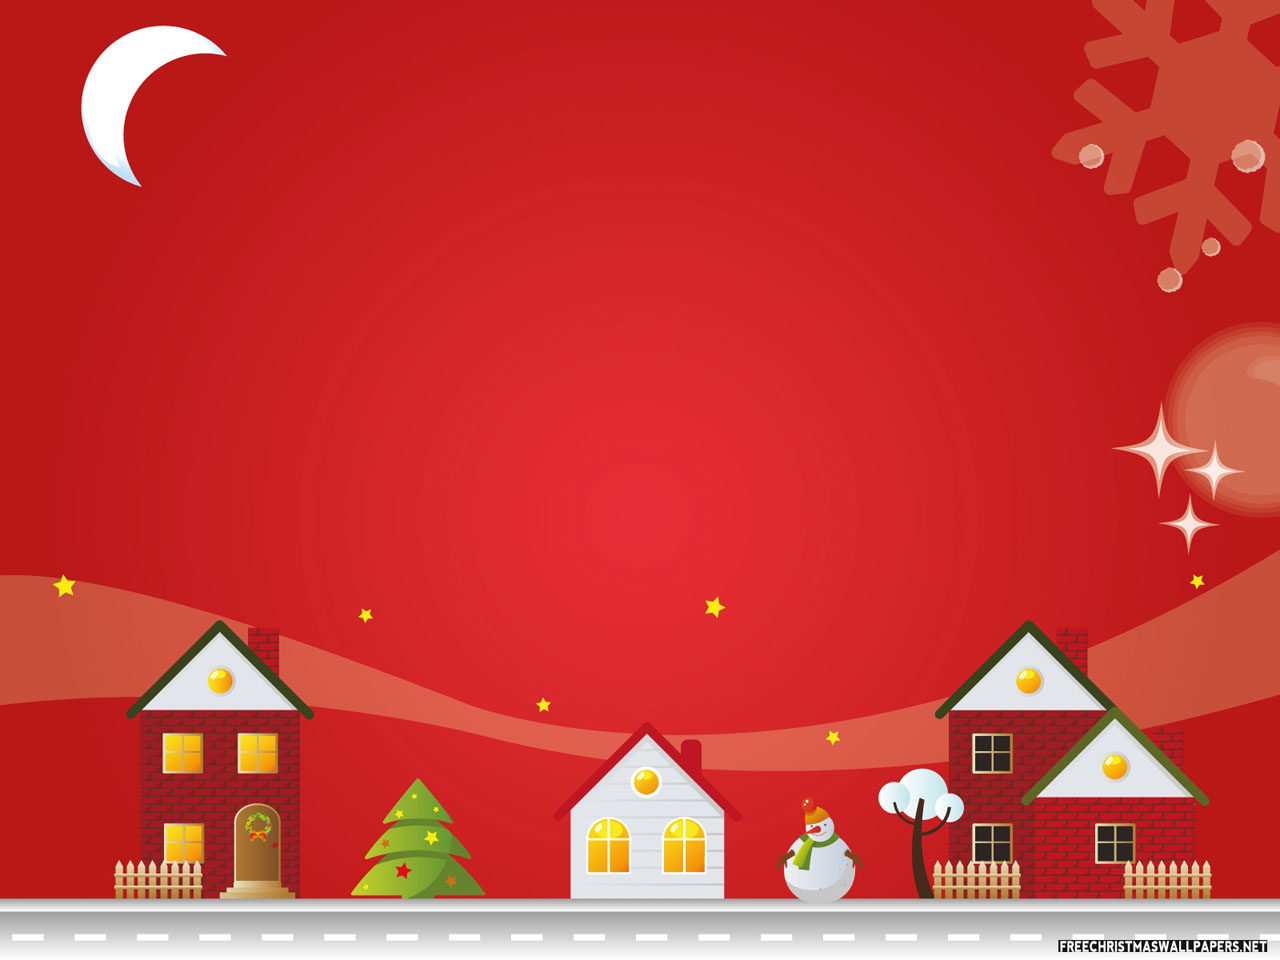 Beautiful Christmas and Winter themed Wallpaper for your desktop